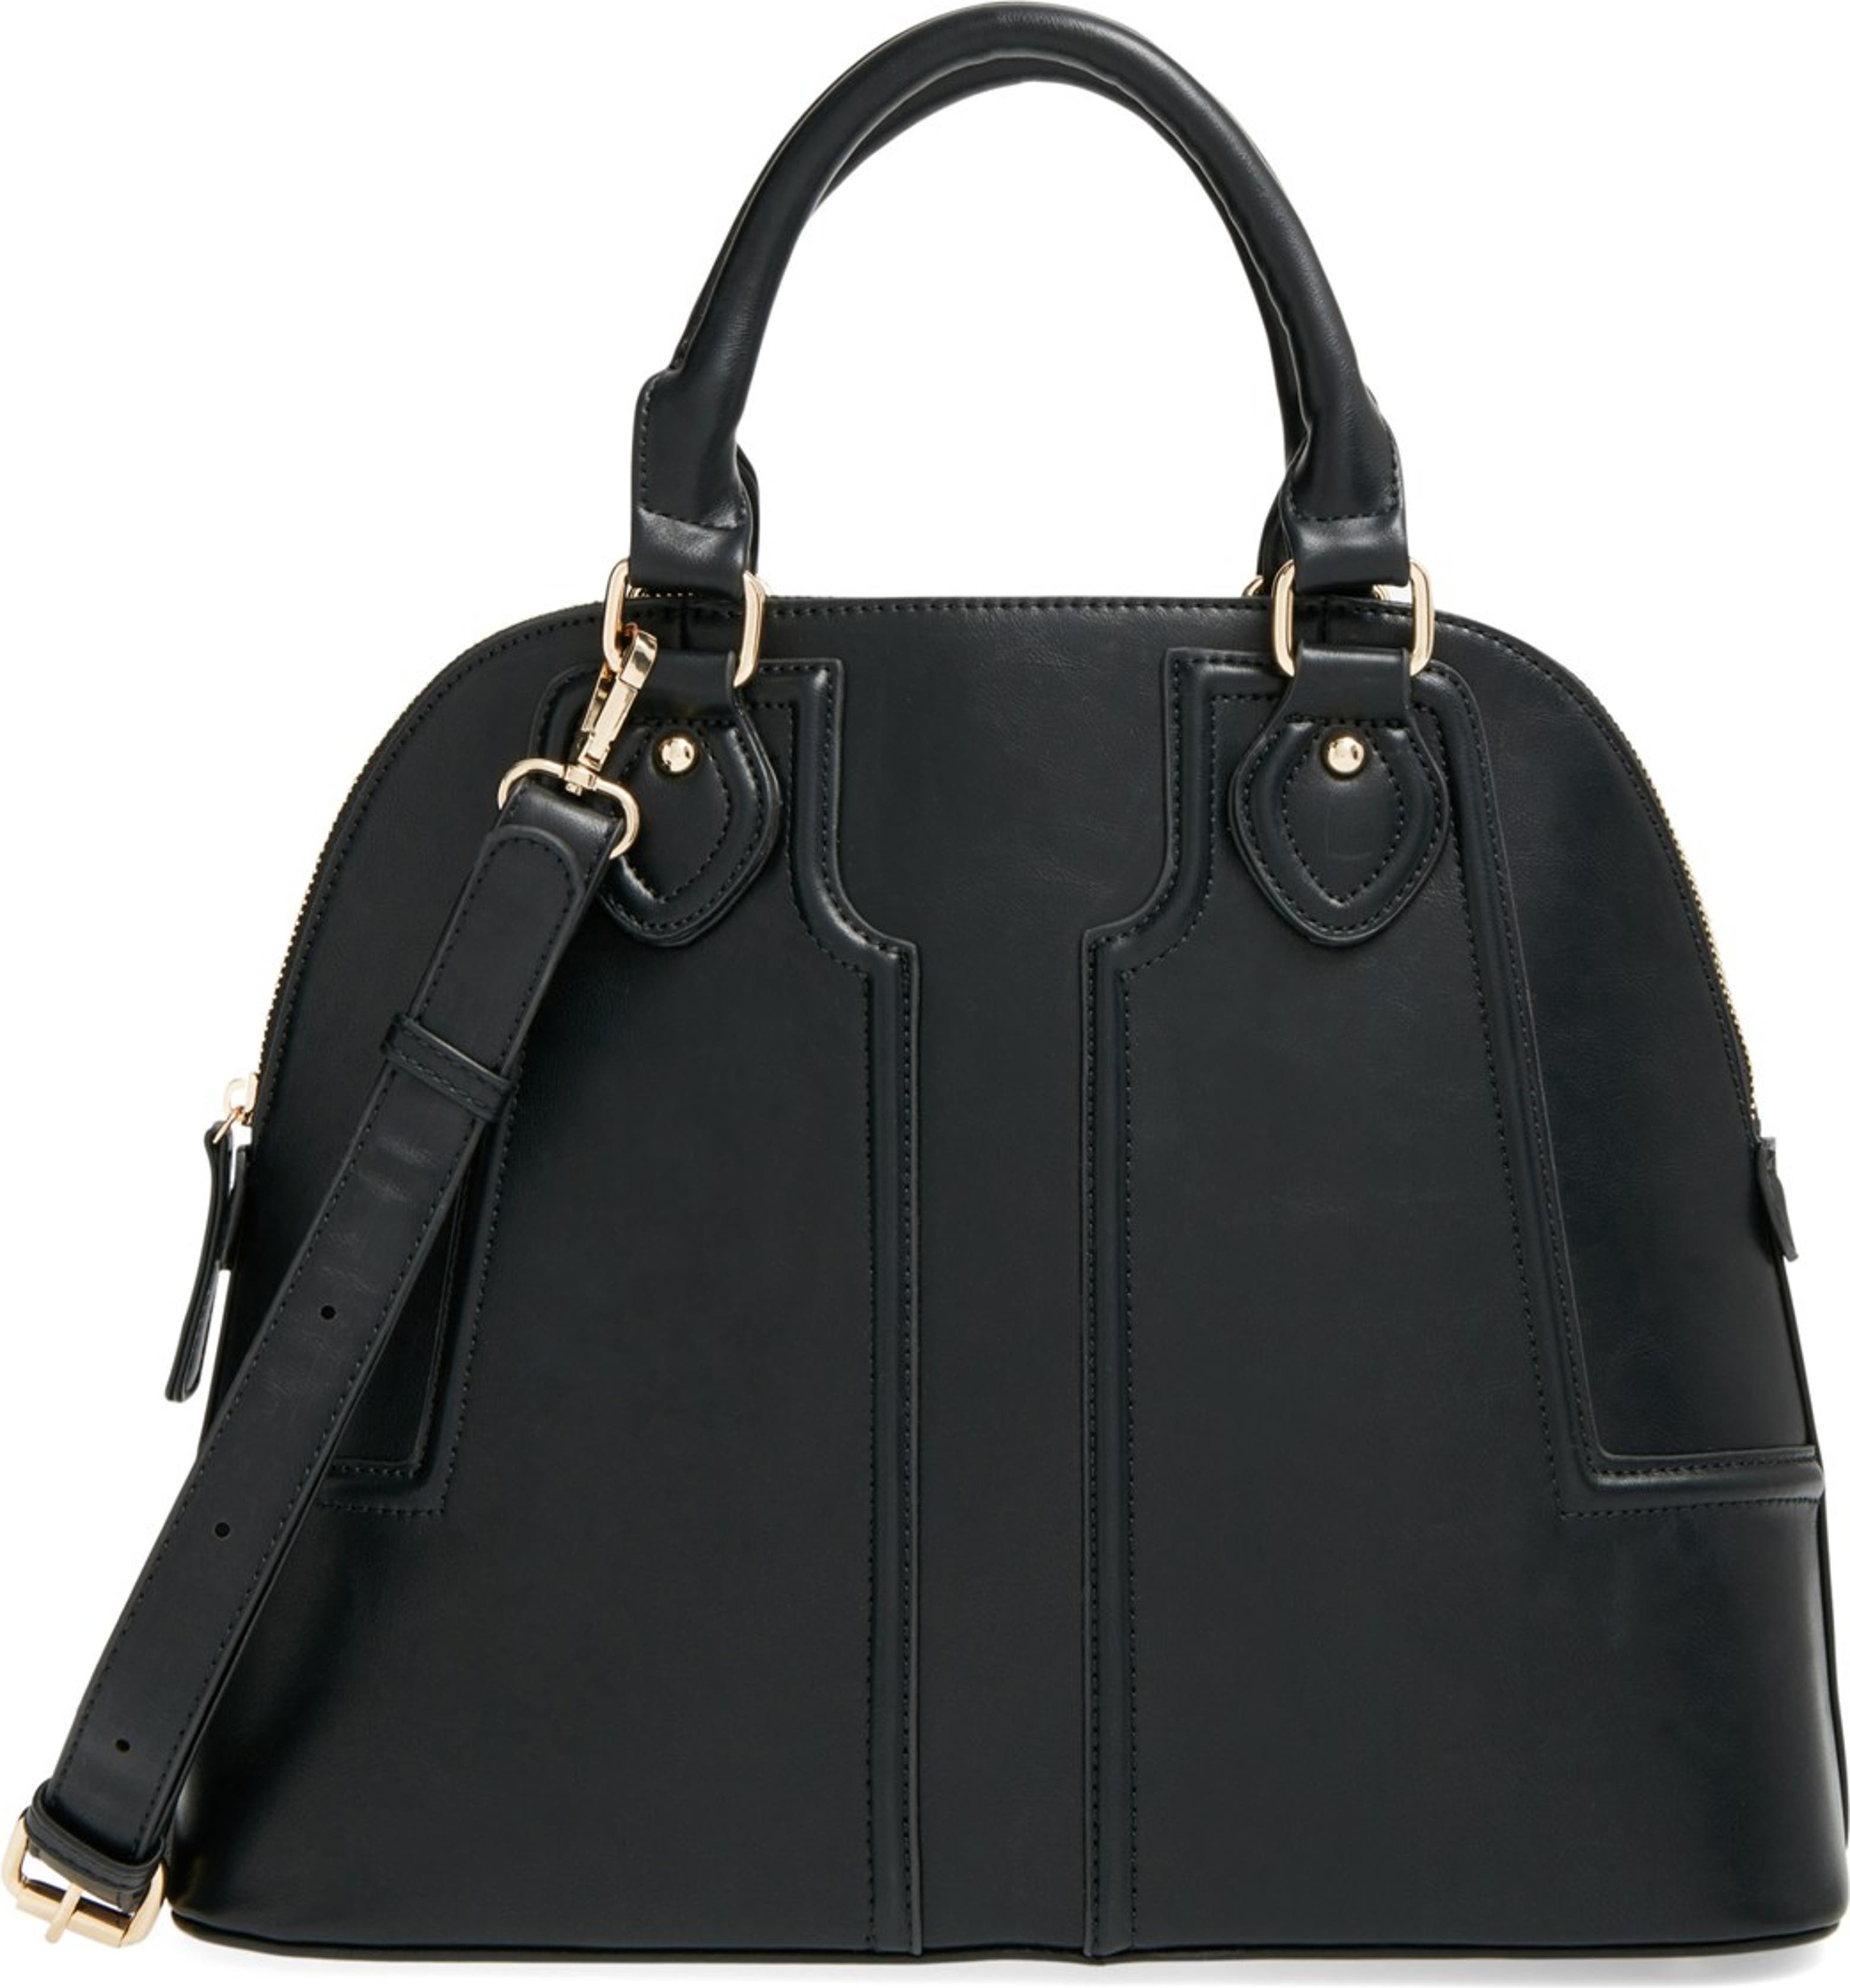 Sole Society 'Marlow' Structured Dome Satchel | Nordstrom